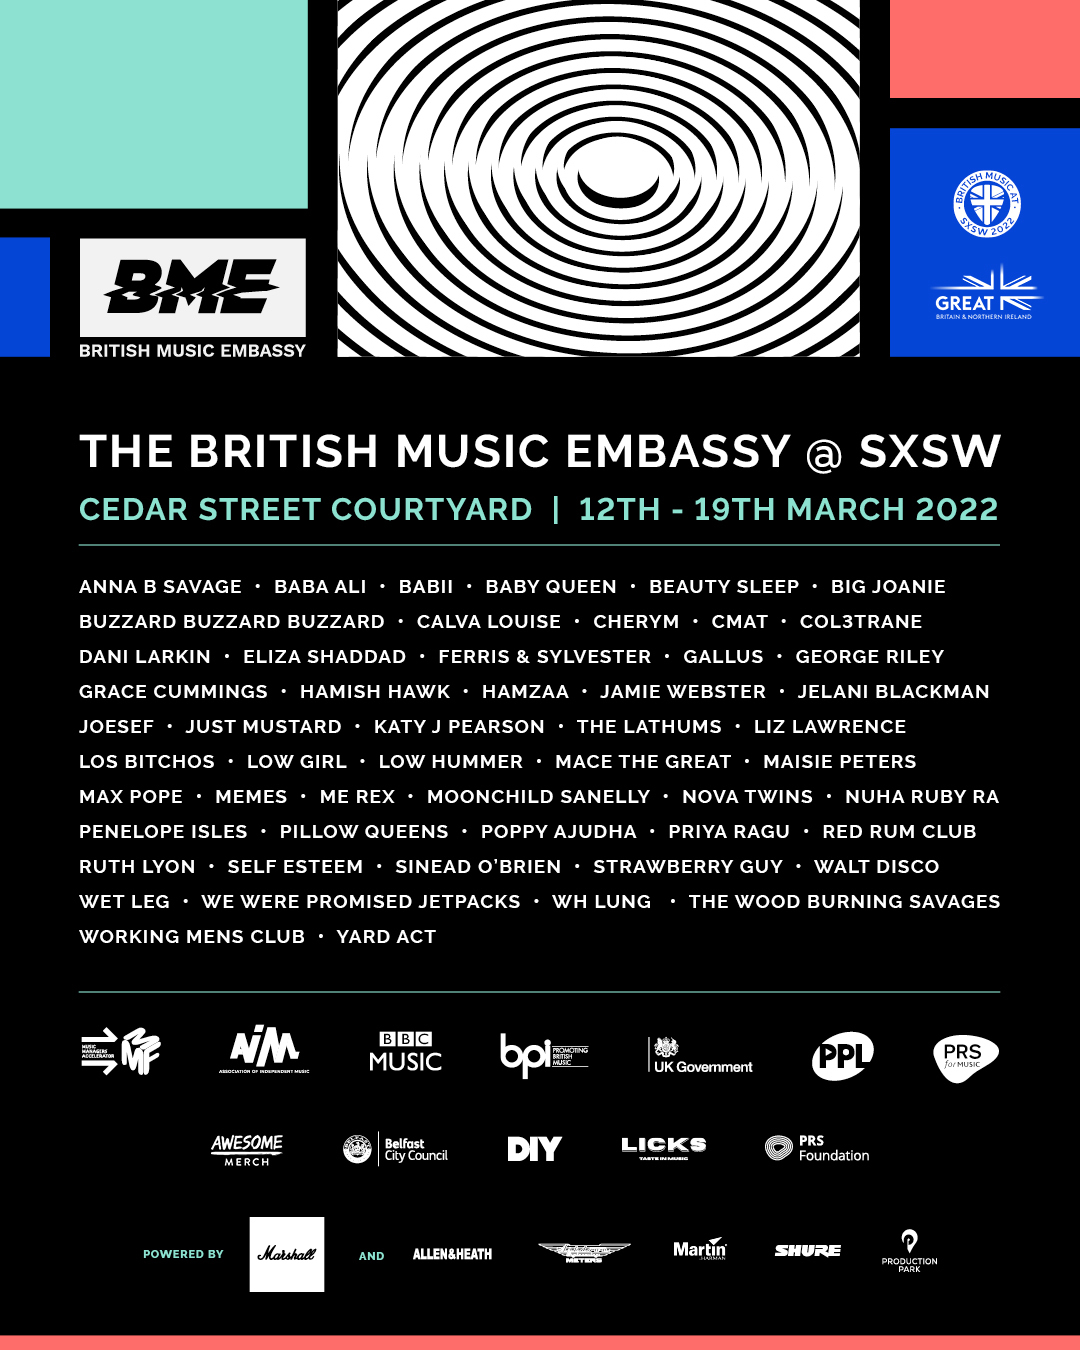 CMAT, Moonchild Sanelly & more to play DIY's British Music Embassy showcase at SXSW